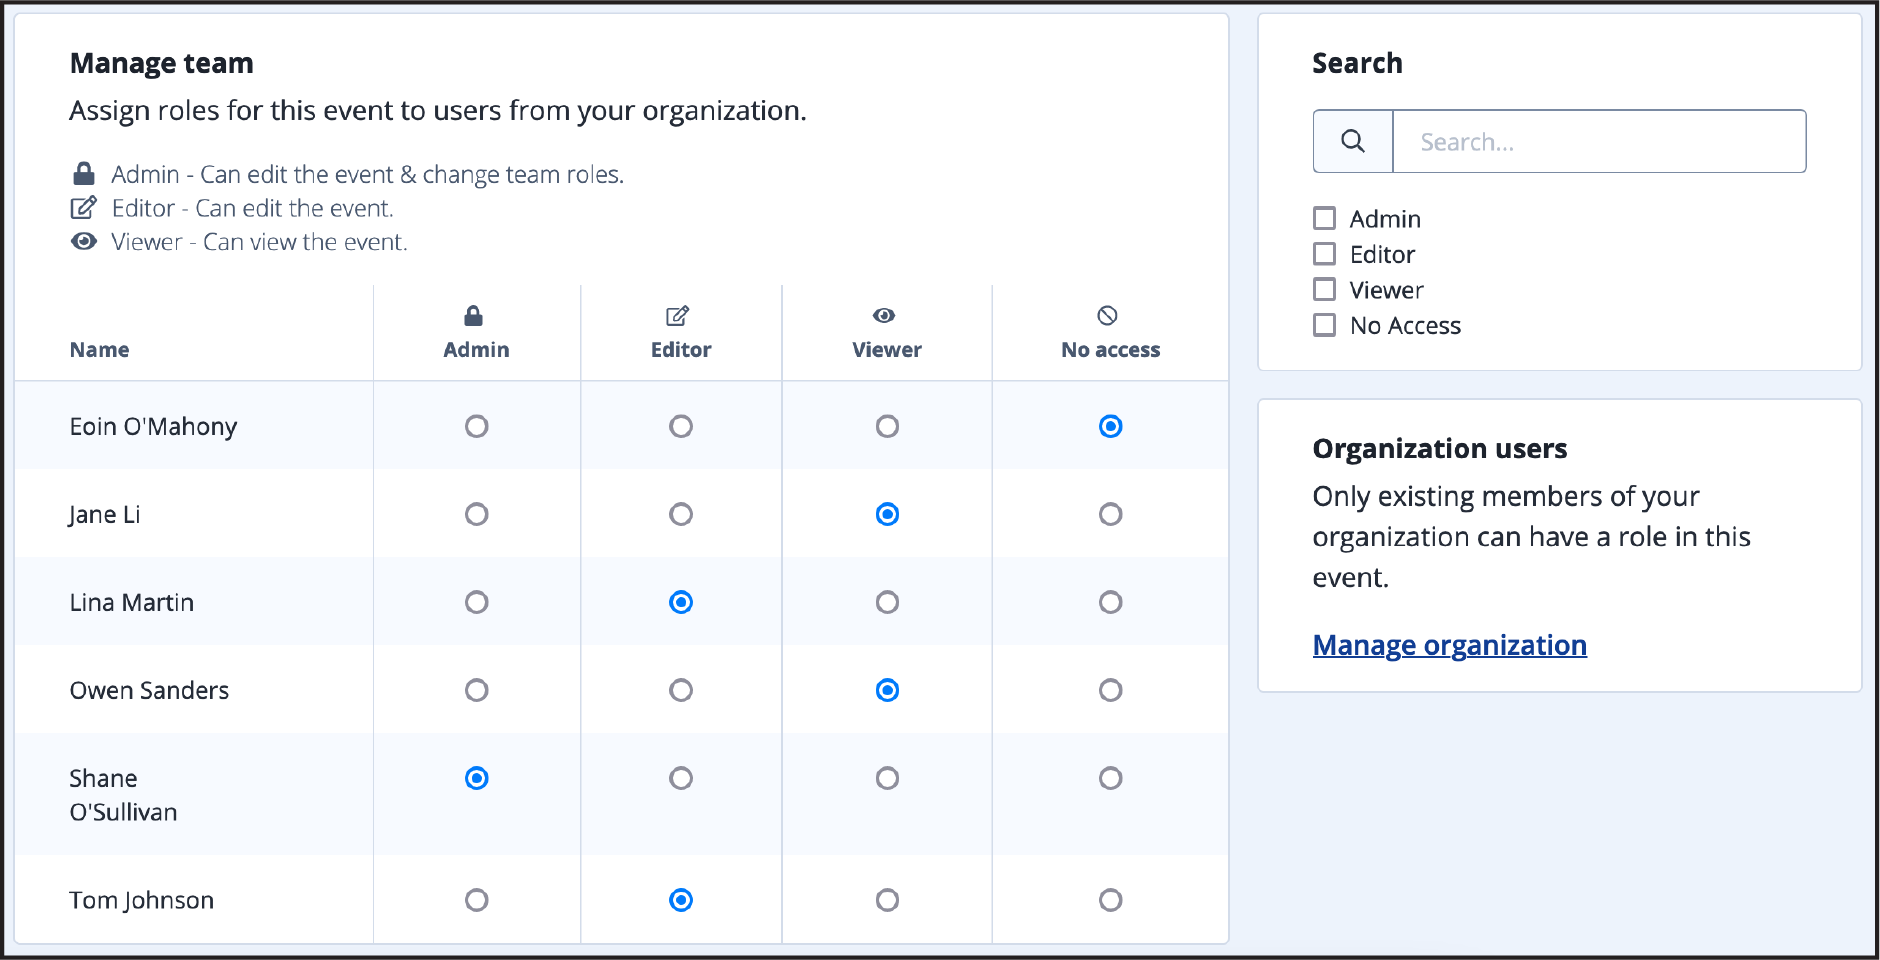 Manage team page